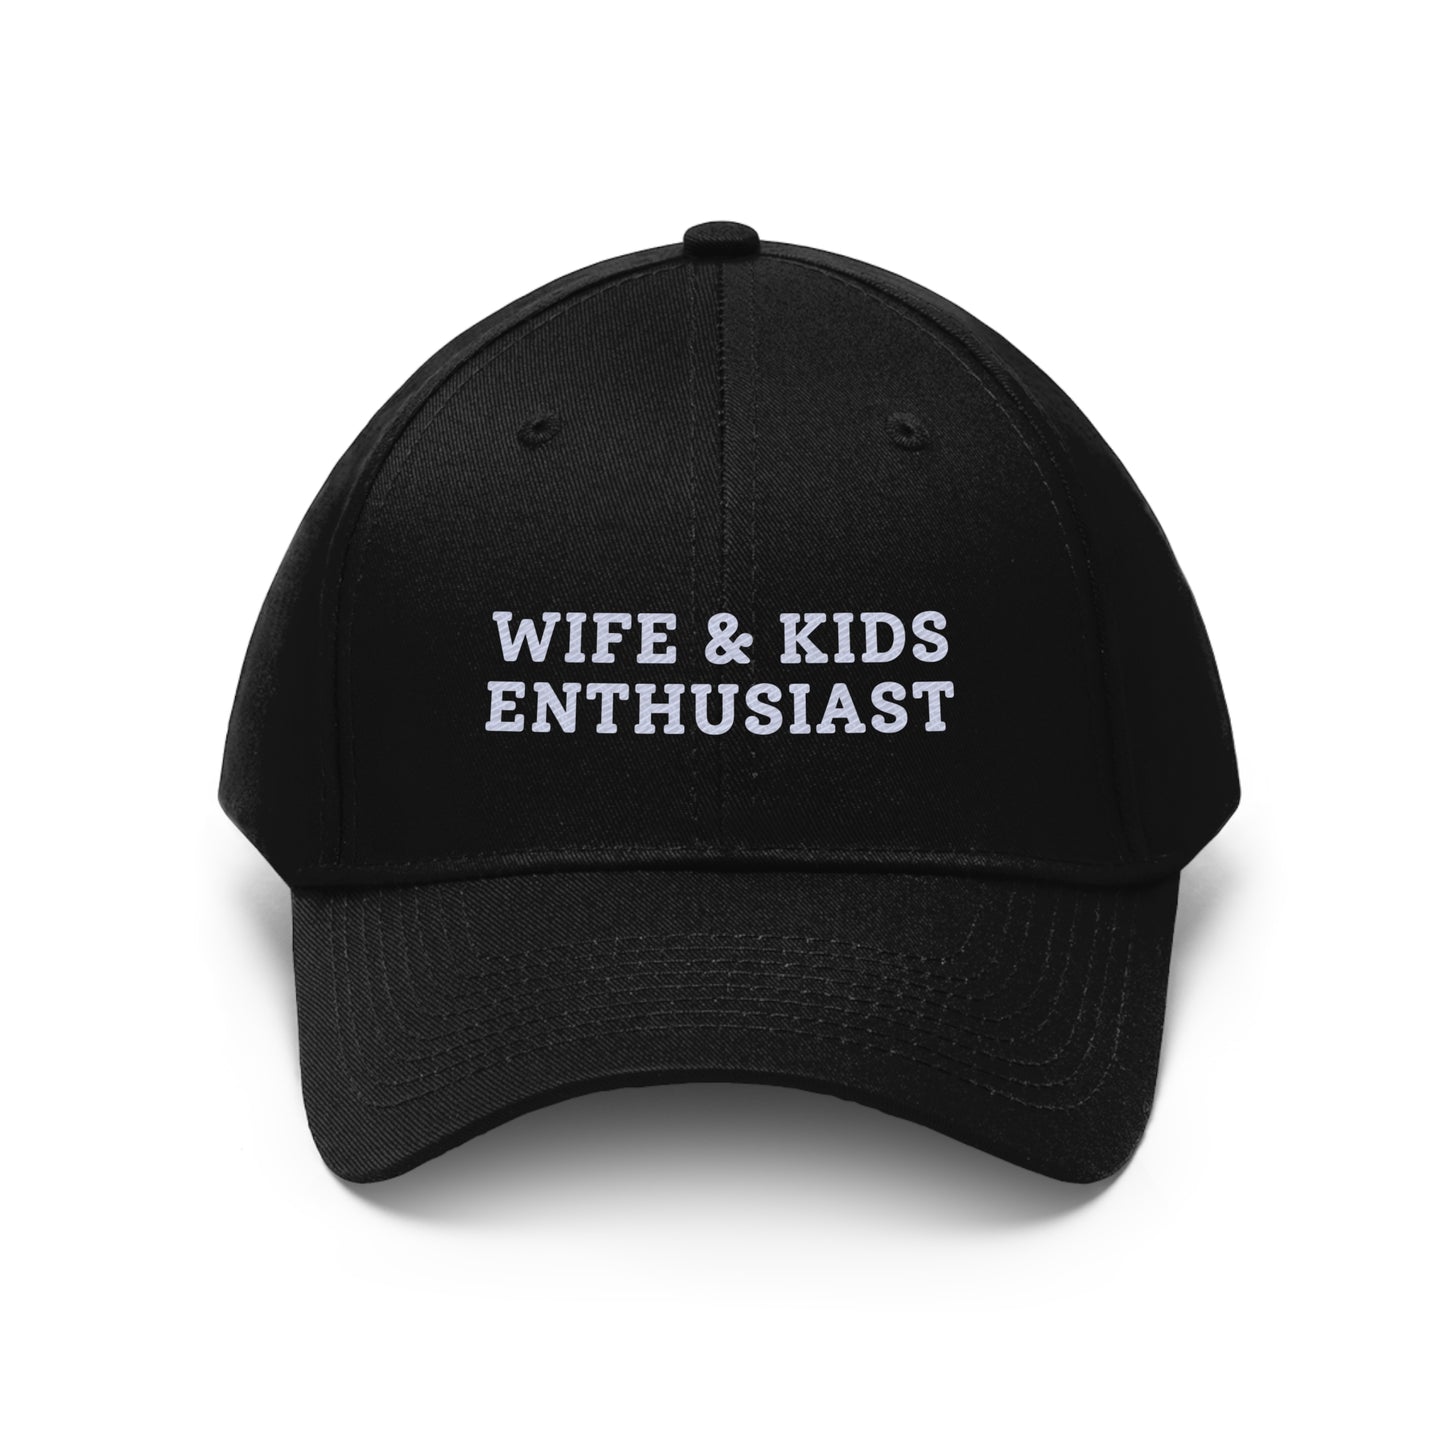 "Wife & Kids Enthusiast" Hat